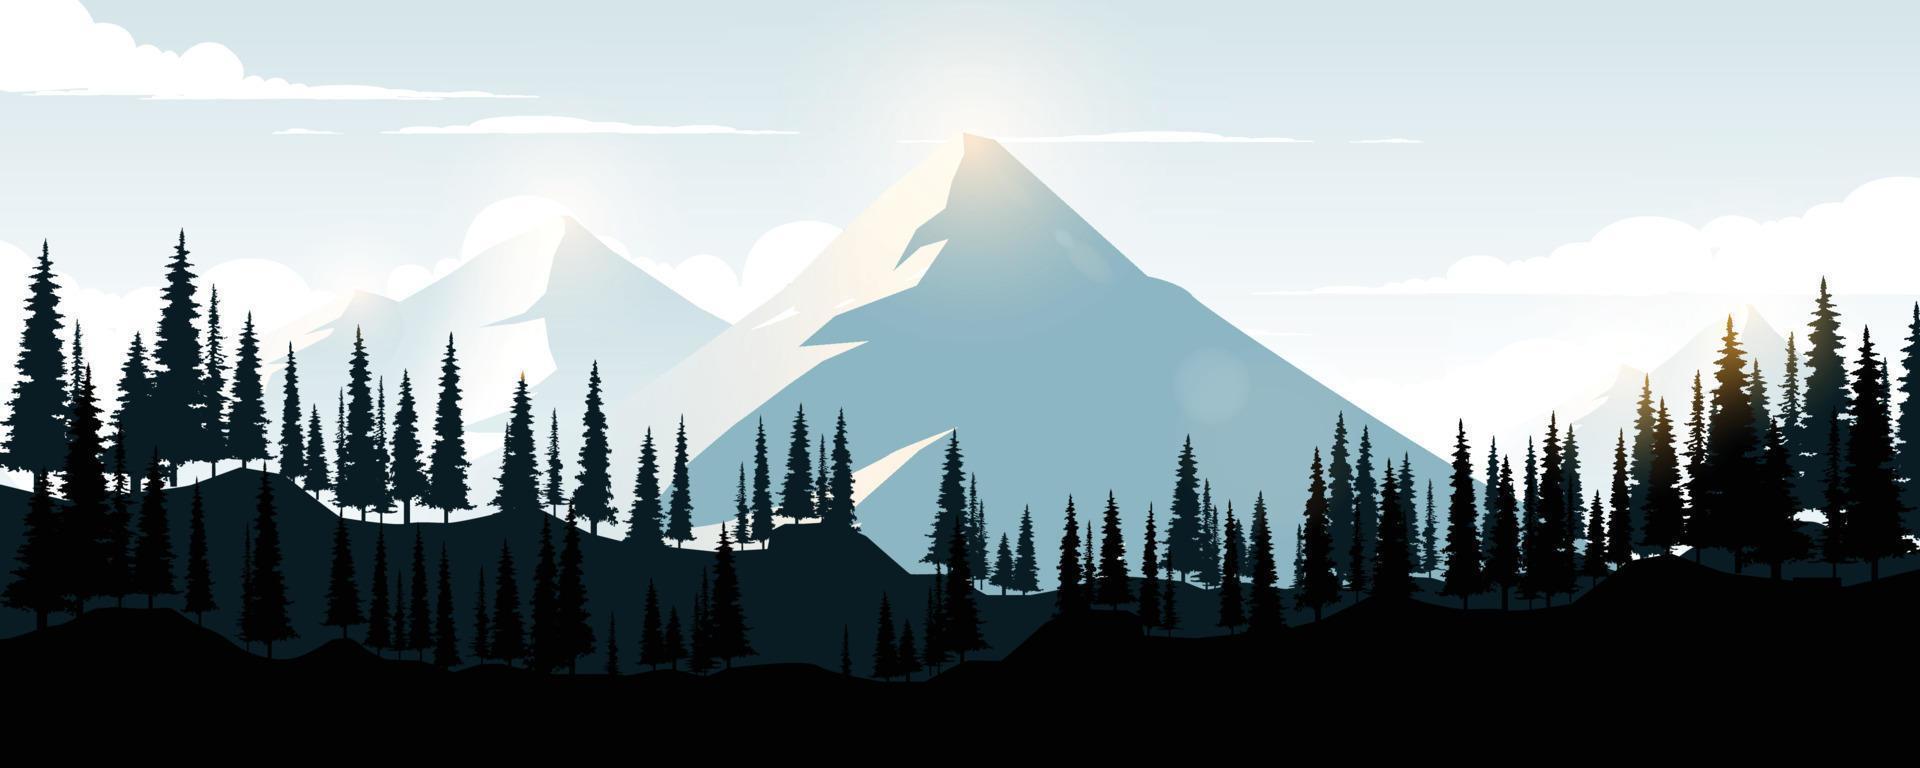 Landscape of mountains and pine forests. vector